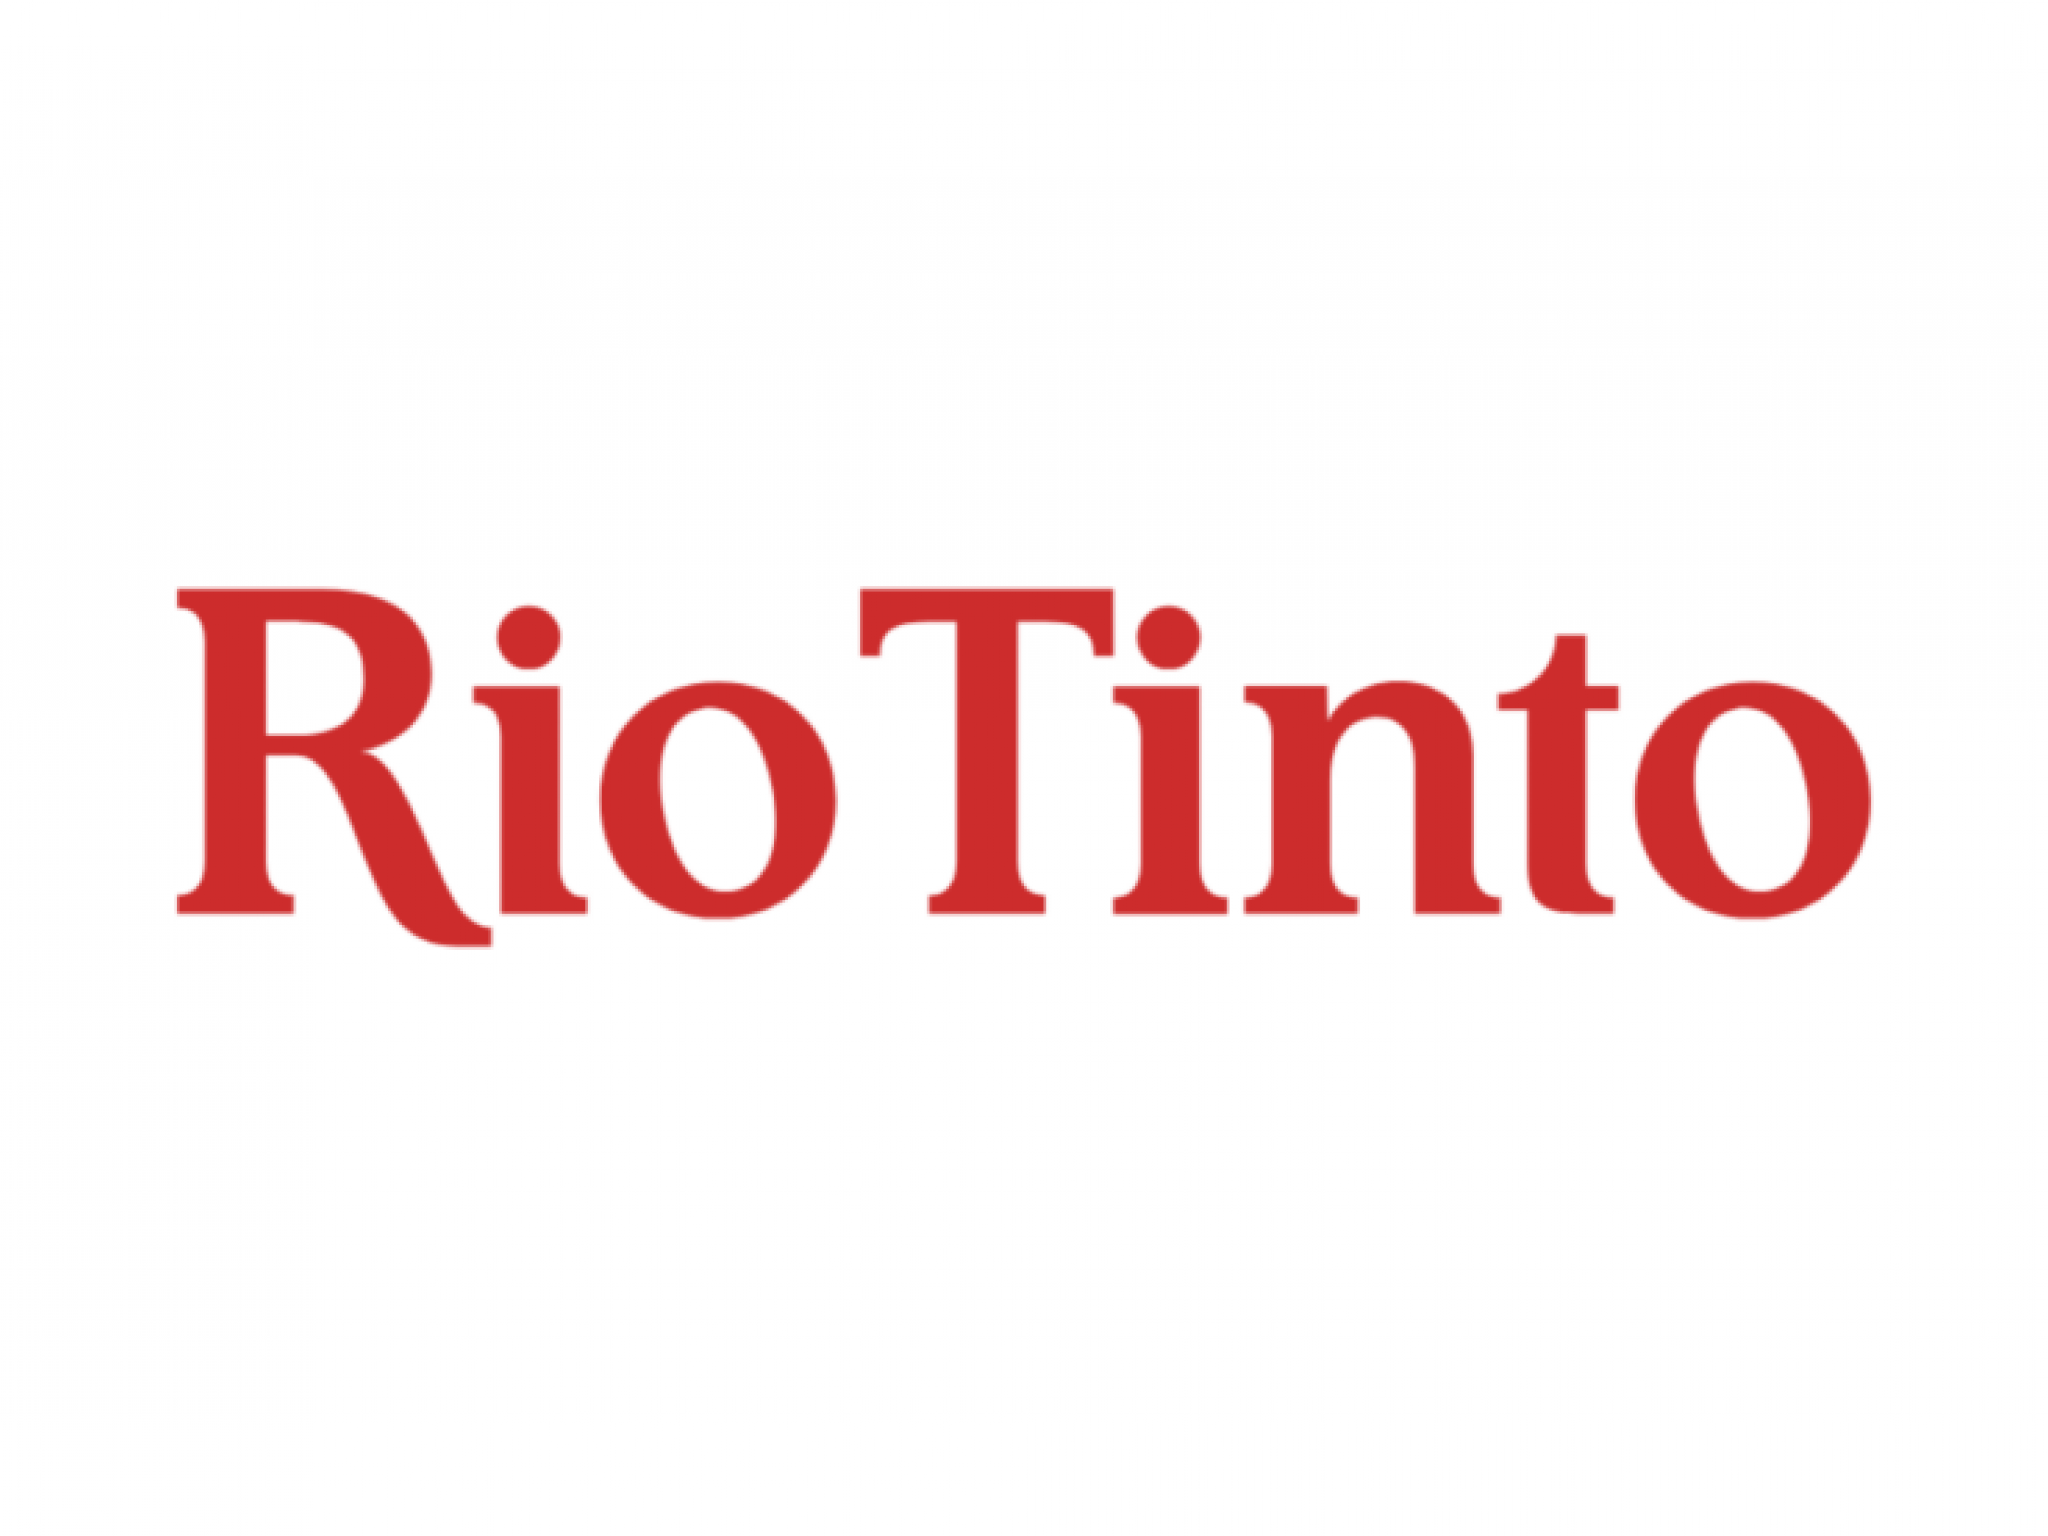  whats-going-on-with-mining-giant-rio-tinto-shares-today 